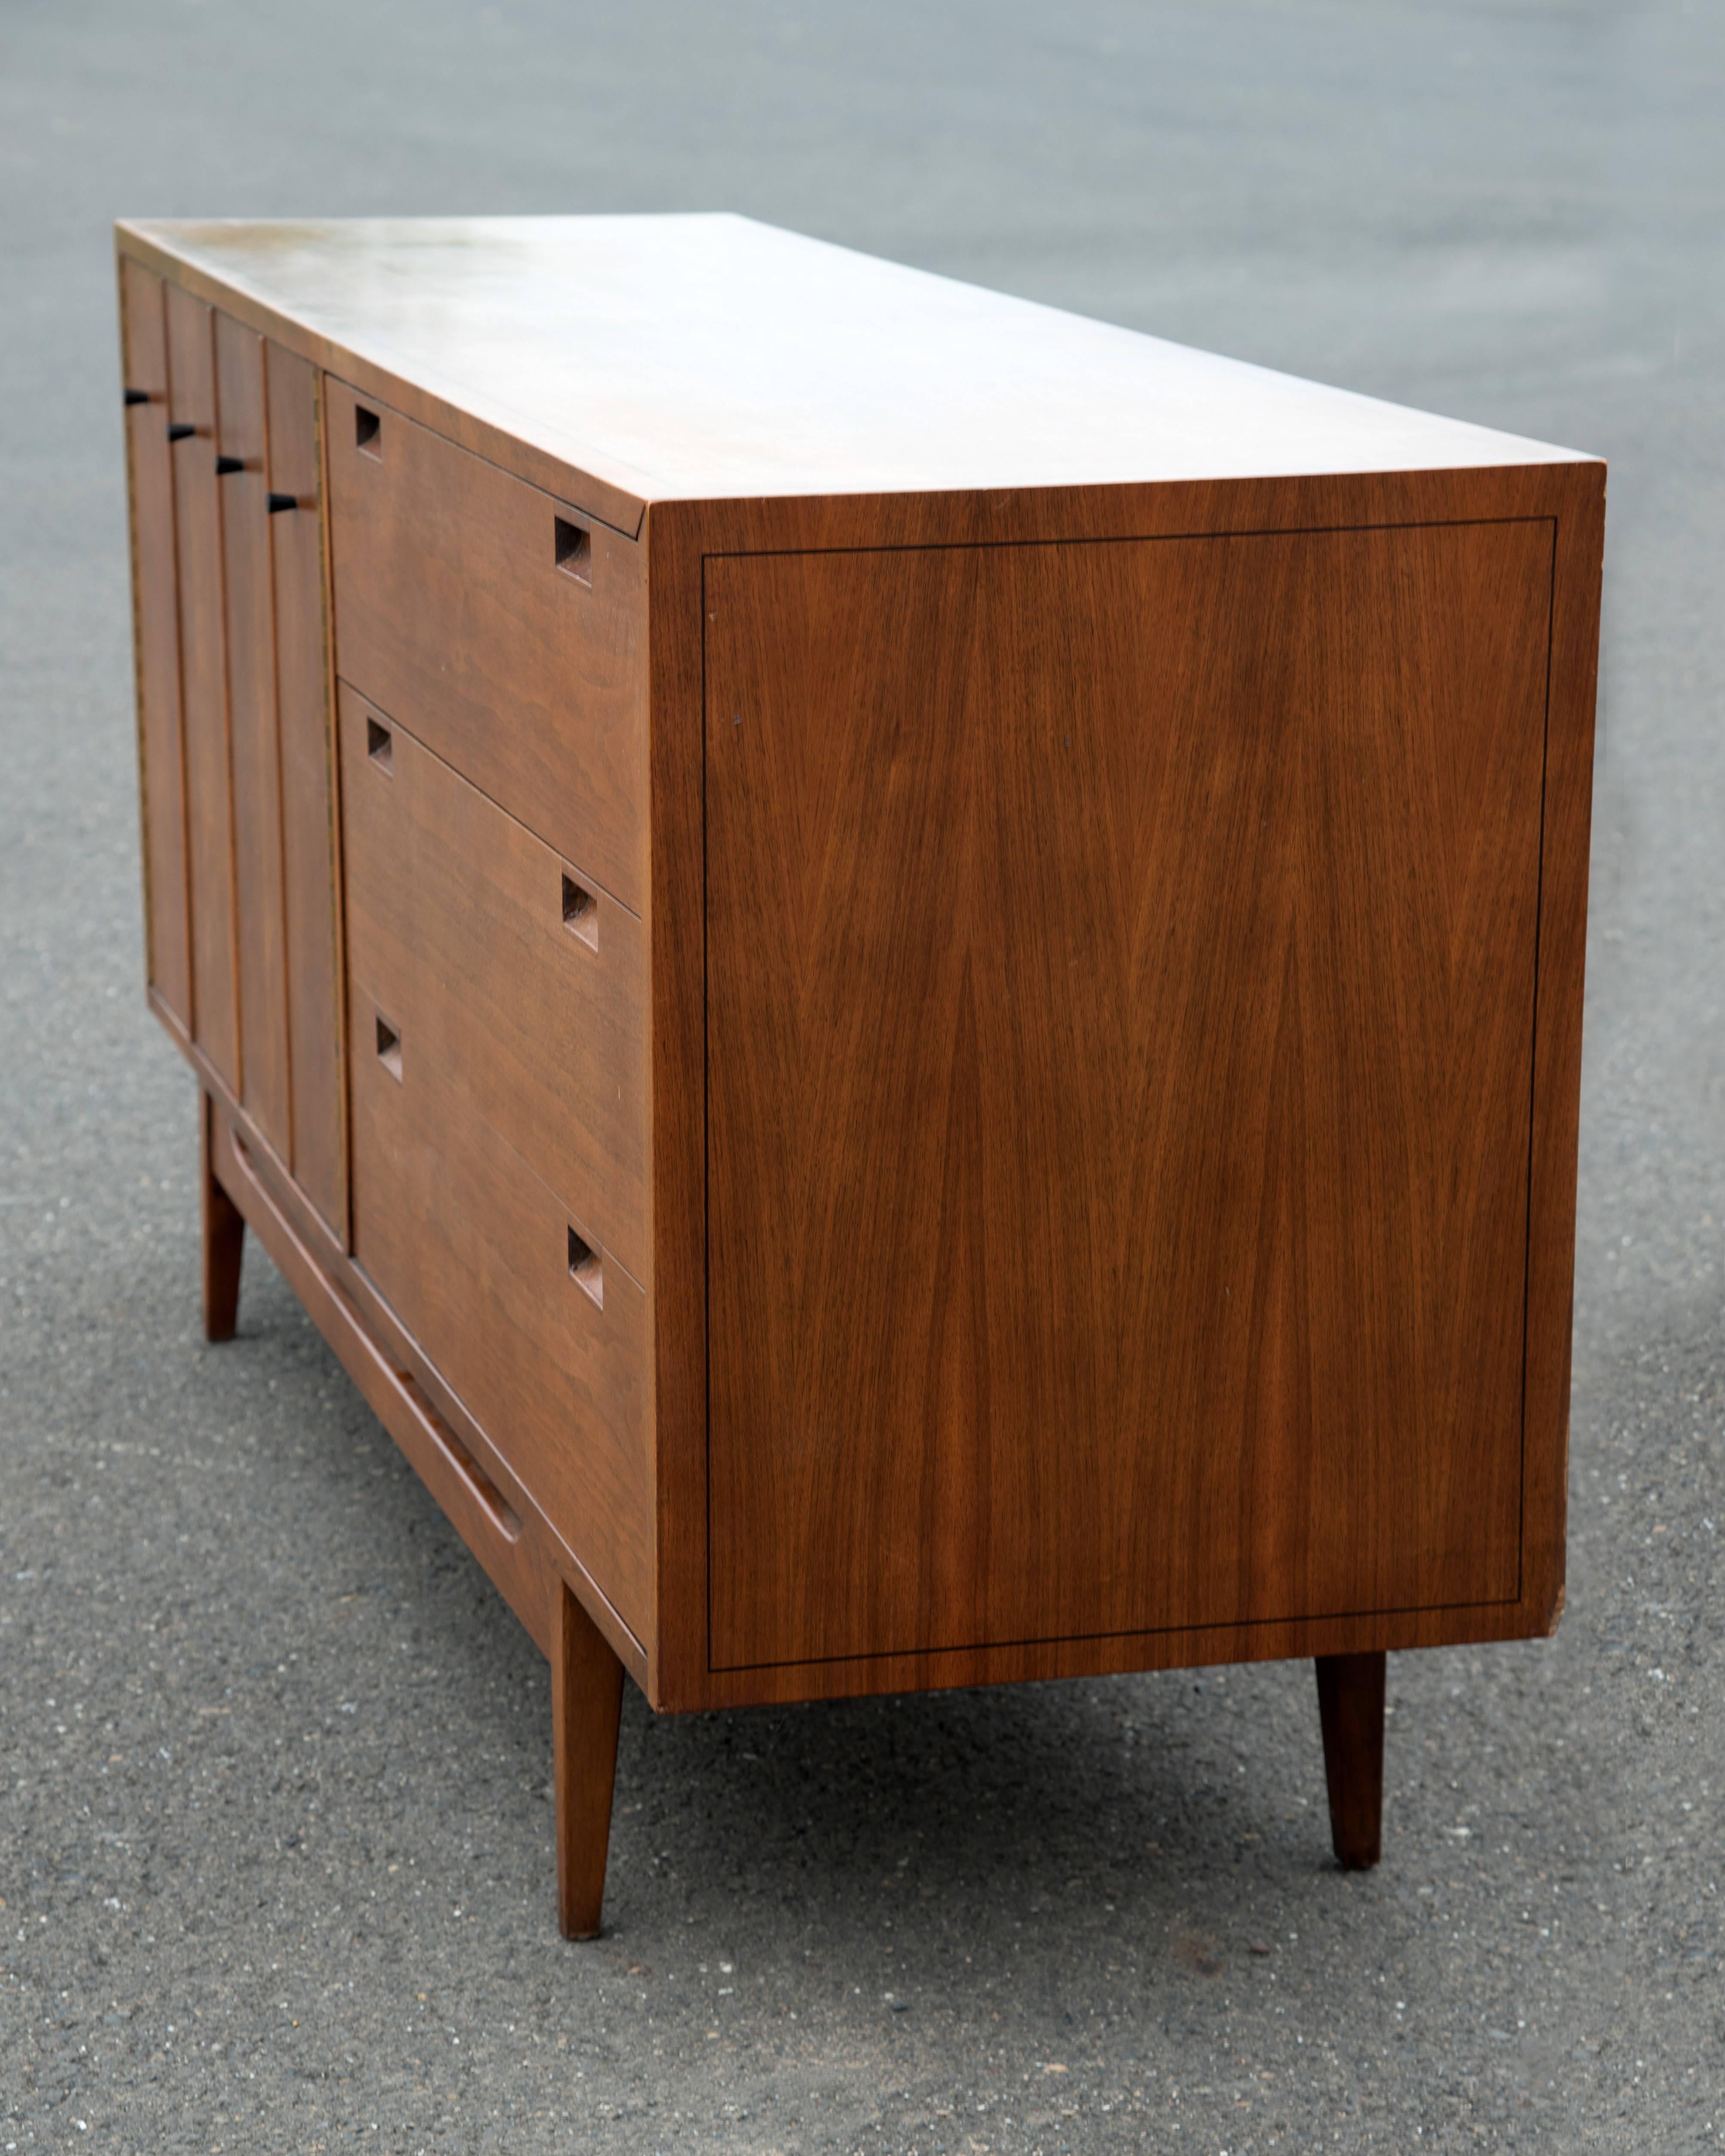 A sexy sleek American of Martinsville dresser having six ample drawers, cleverly designed with three of them hidden behind panel doors. Recessed Campaign style handles. Gorgeous mid century modern quality craftsmanship.